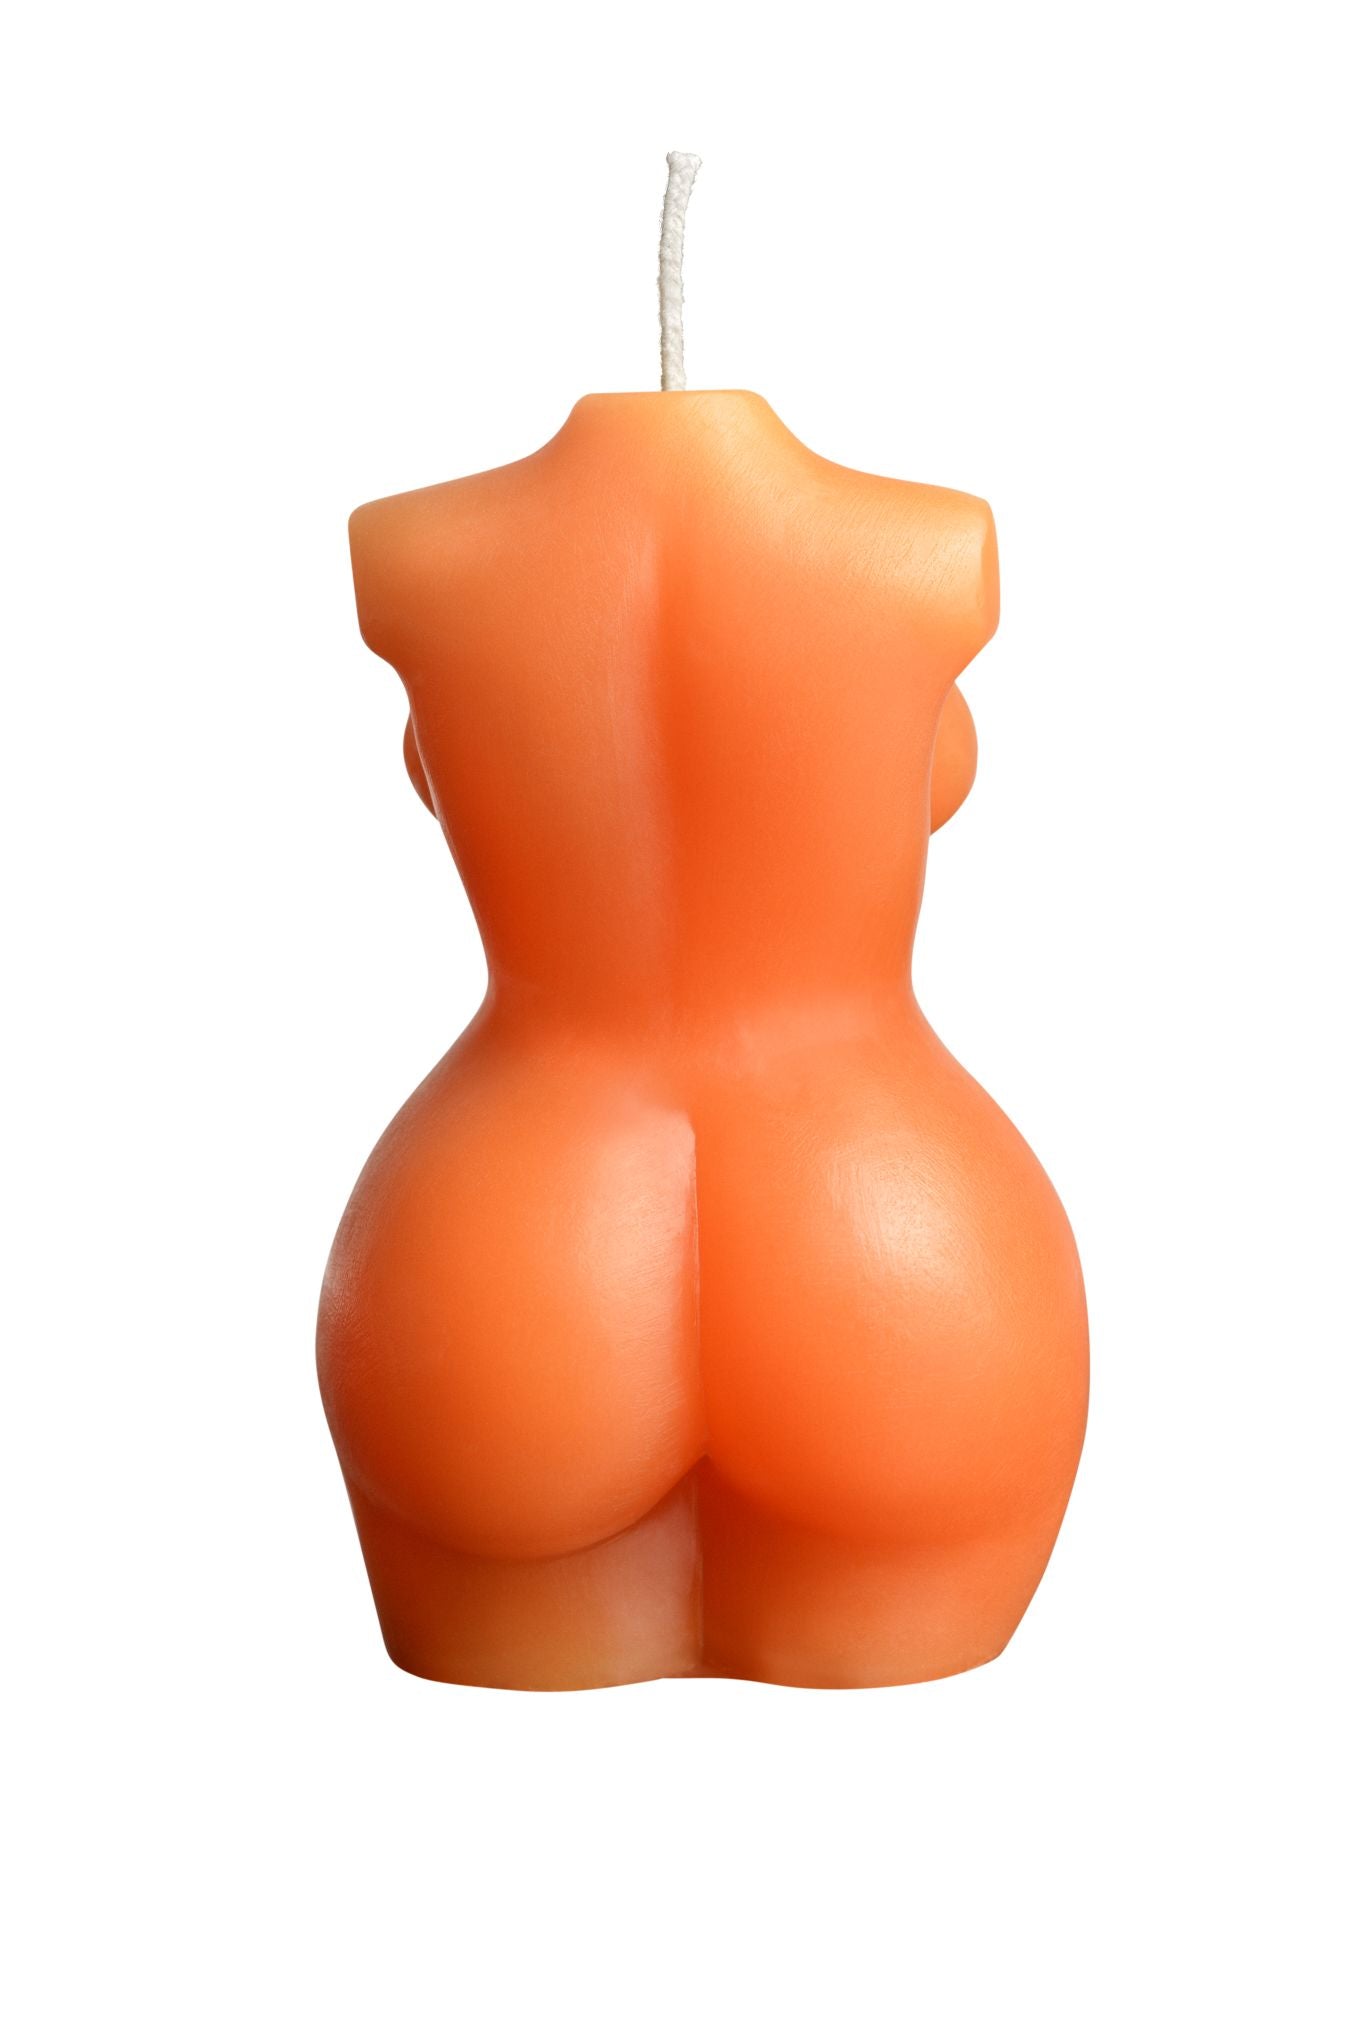 Photo of the back of the LaCire Torso Candle from Sportsheets (form 1/orange) shows its female backside.